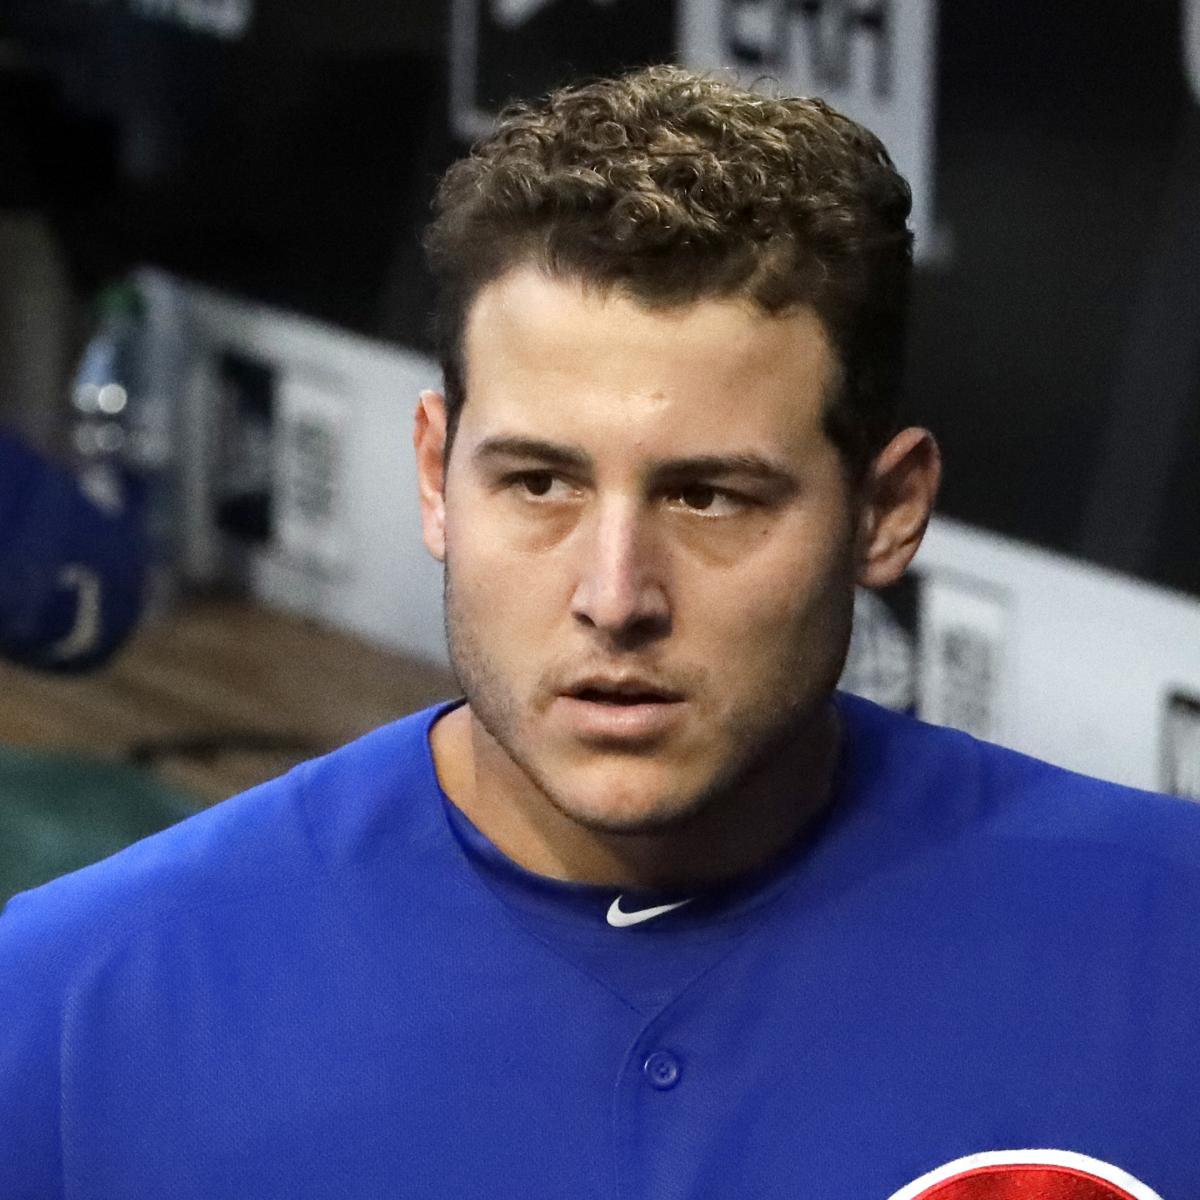 WCVB Channel 5 Boston - He was rumored to possibly be coming back to the  #RedSox, but multiple reports say #Cubs first baseman Anthony Rizzo is  being traded to the Yankees. 😔⚾